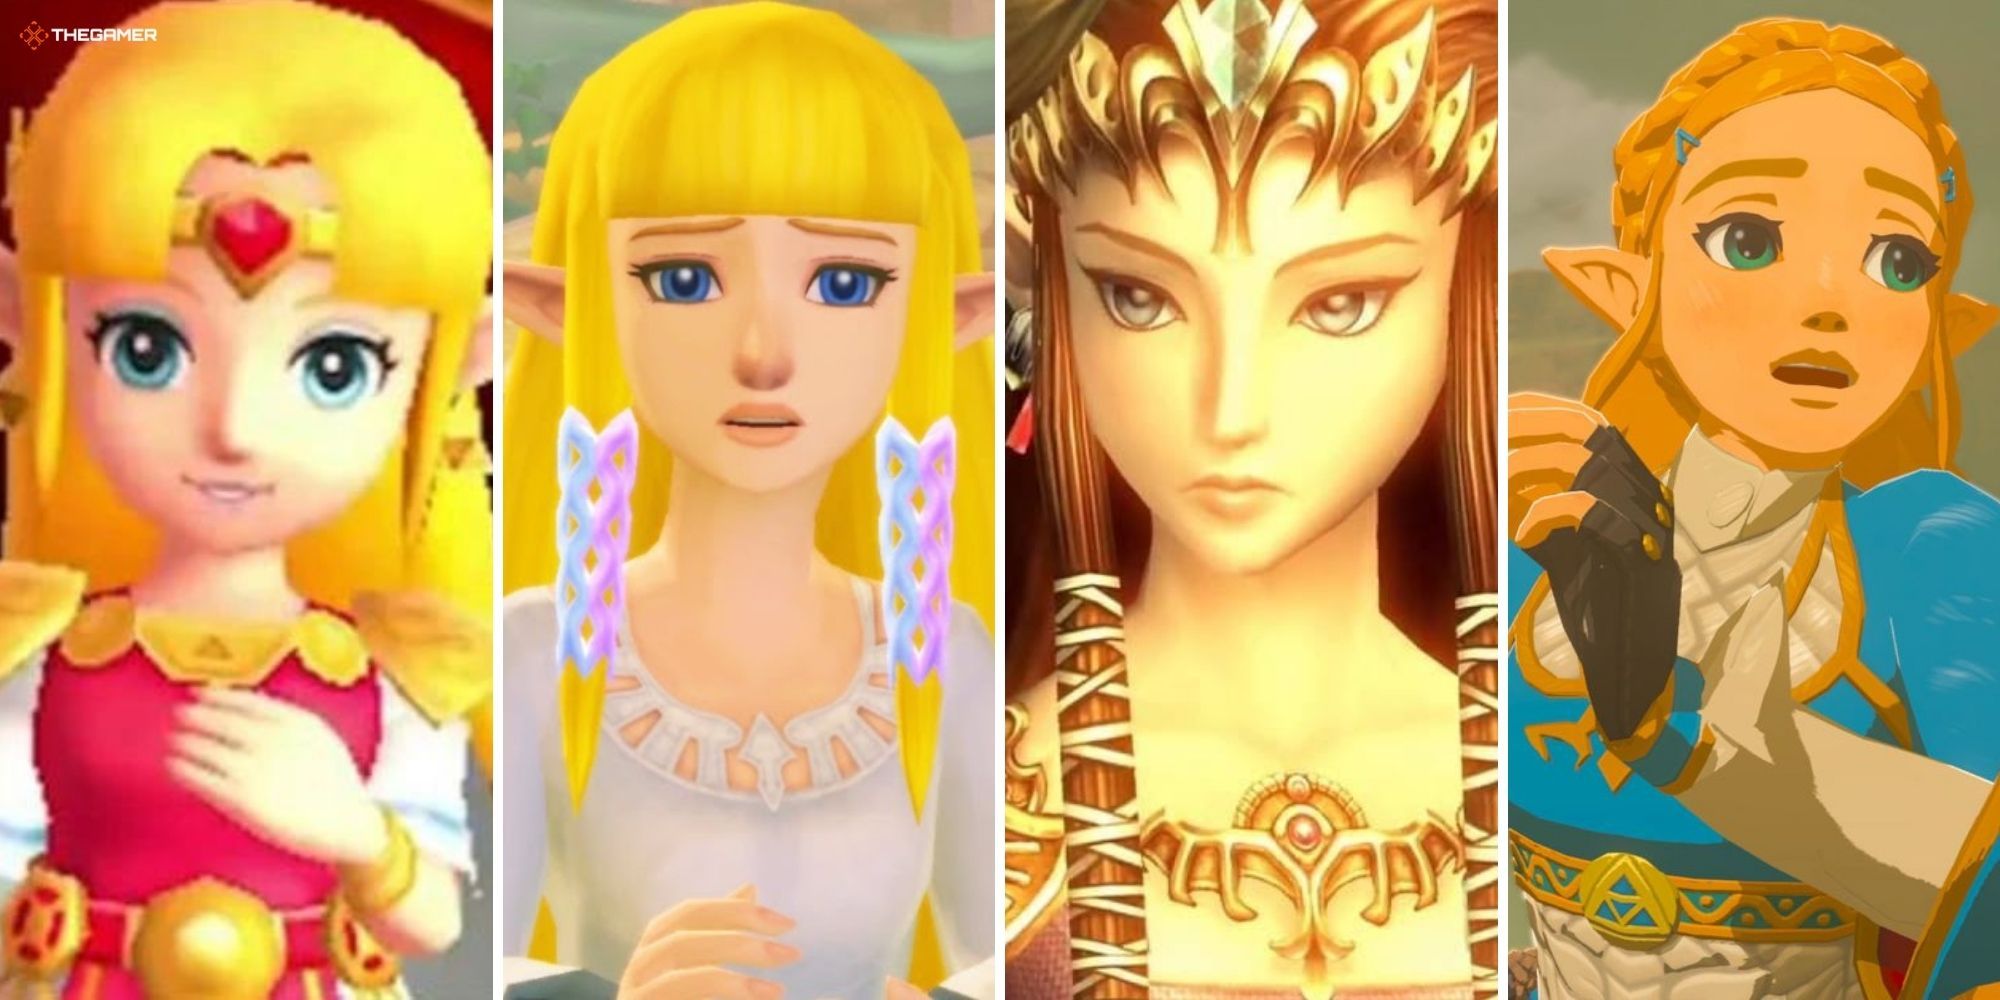 Zelda from (left to right) A Link to the Past, Skyward Sword, Twilight Princess, and Breath of the Wild